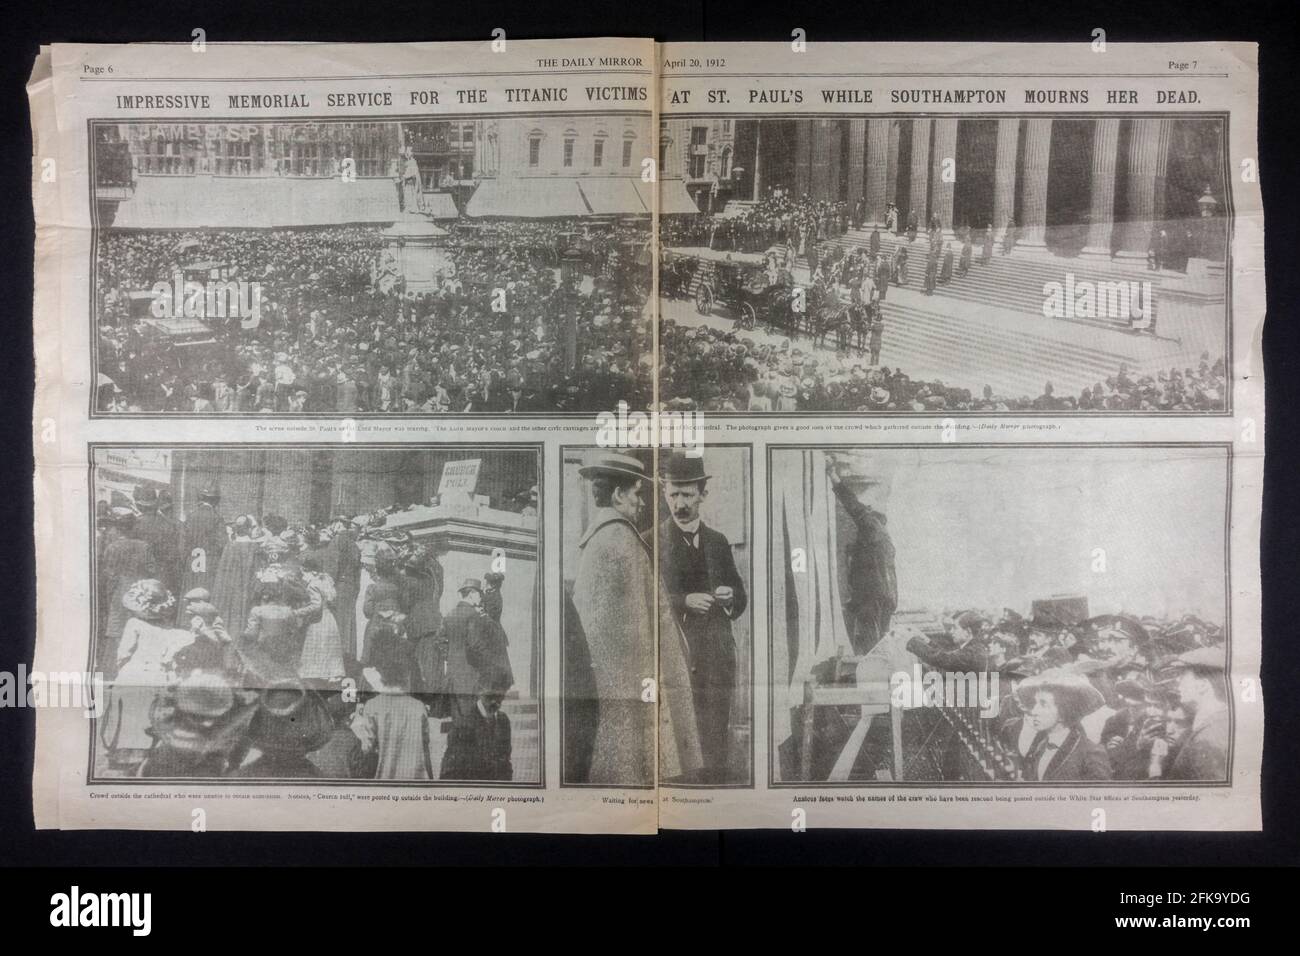 Photograph of memorial service at St Pauls Cathedral,The Daily Mirror (replica) newspaper from 20th Apr 1912 following the sinking of the RMS Titanic. Stock Photo